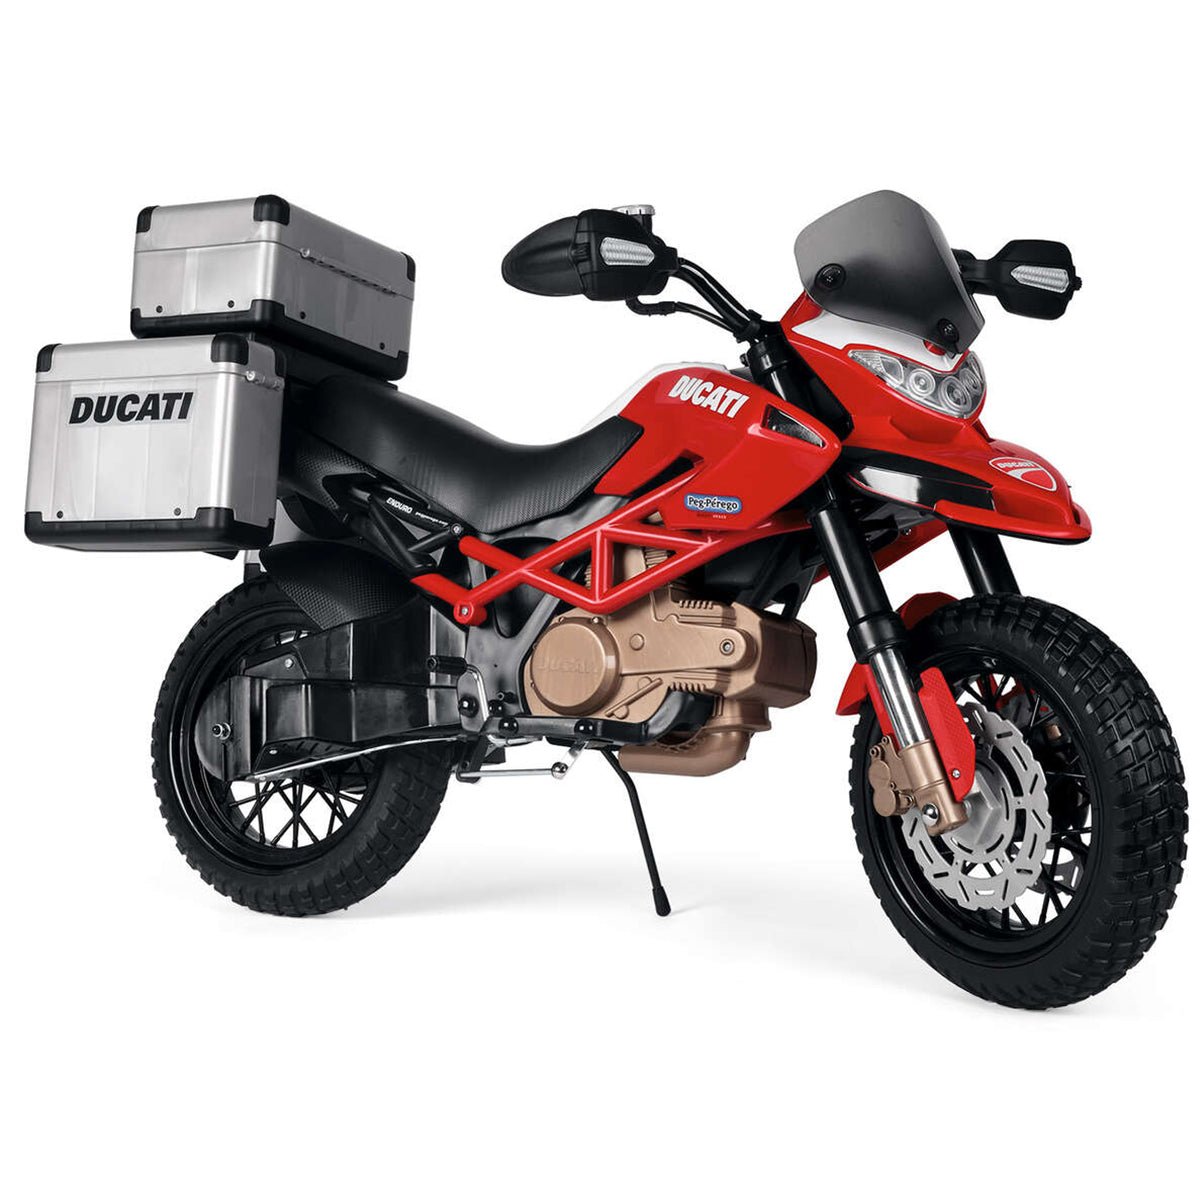  Peg Perego Ducati GP Motorcycle 12 Volt Ride on, Red